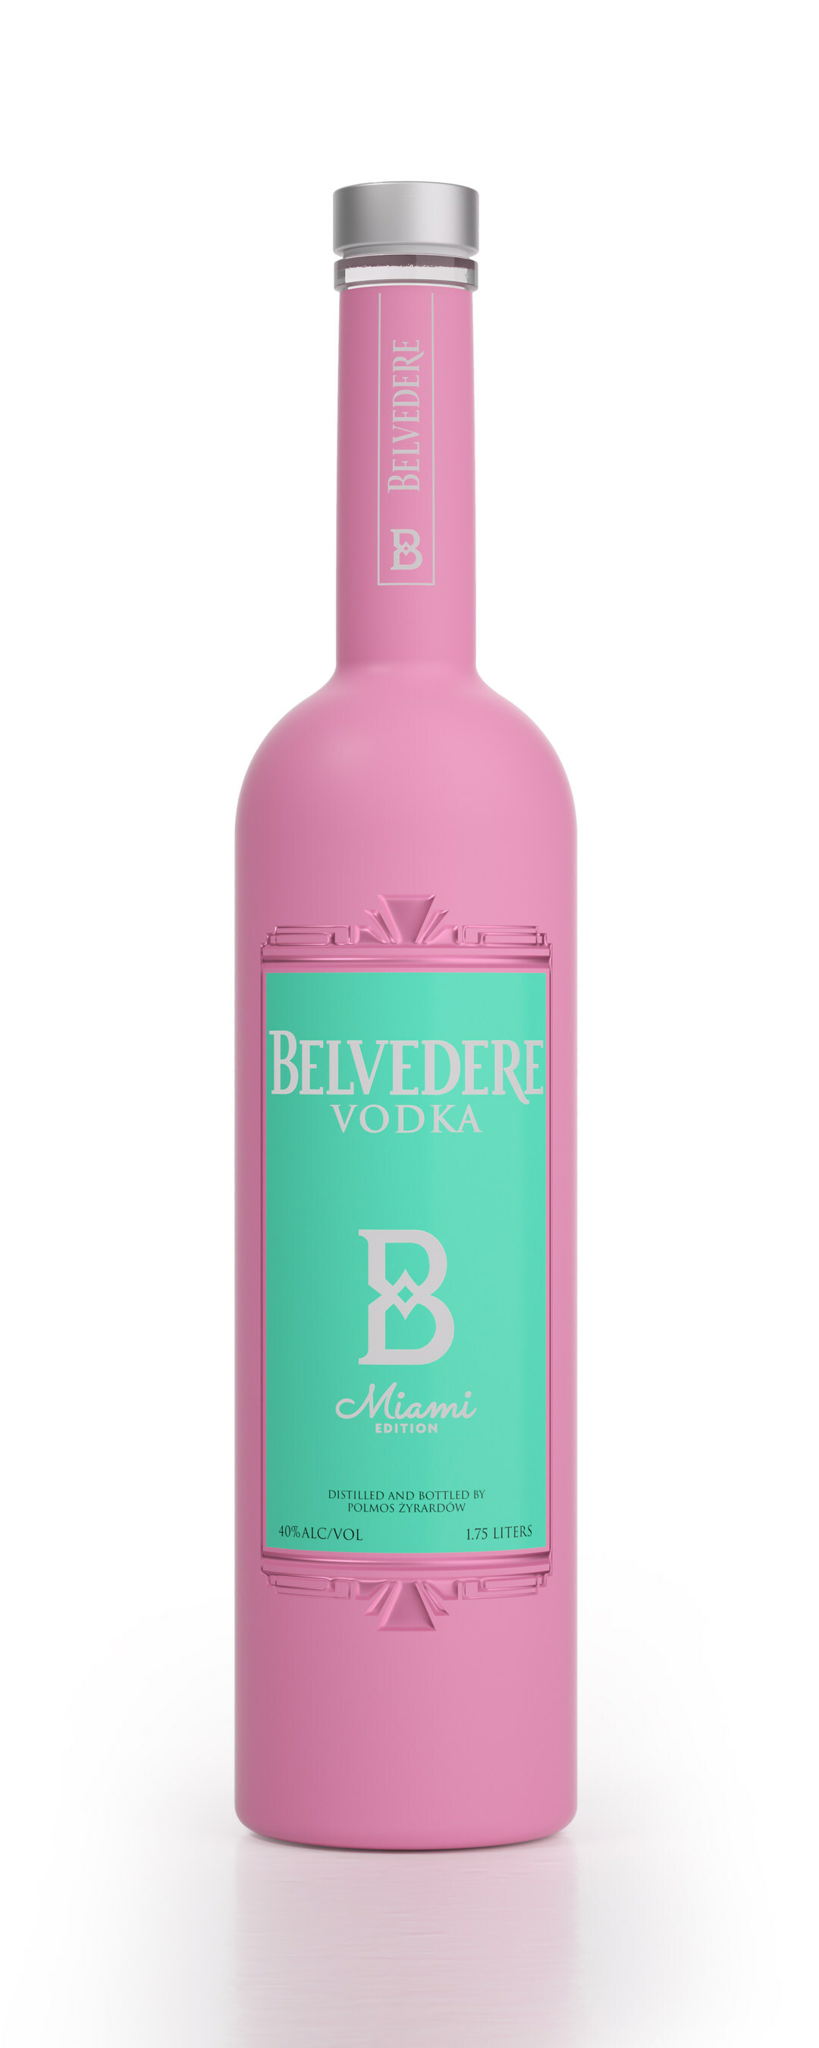 Belvedere Vodka Reclaimed The Night With Its Limited-Edition Bottle For  Miami's Ultra Music Festival